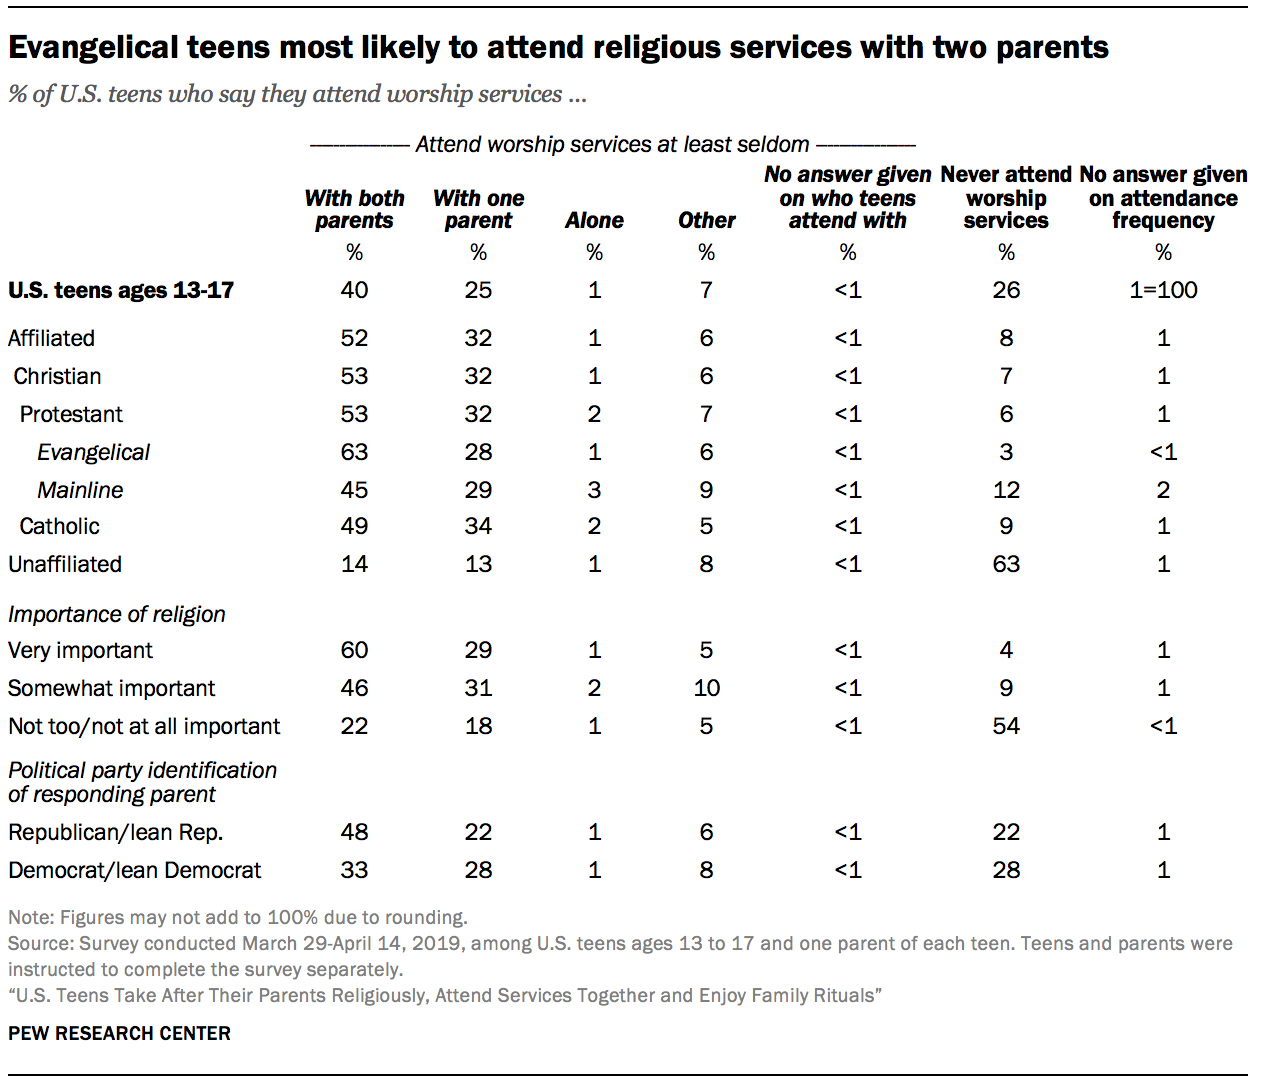 Evangelical teens most likely to attend religious services with two parents